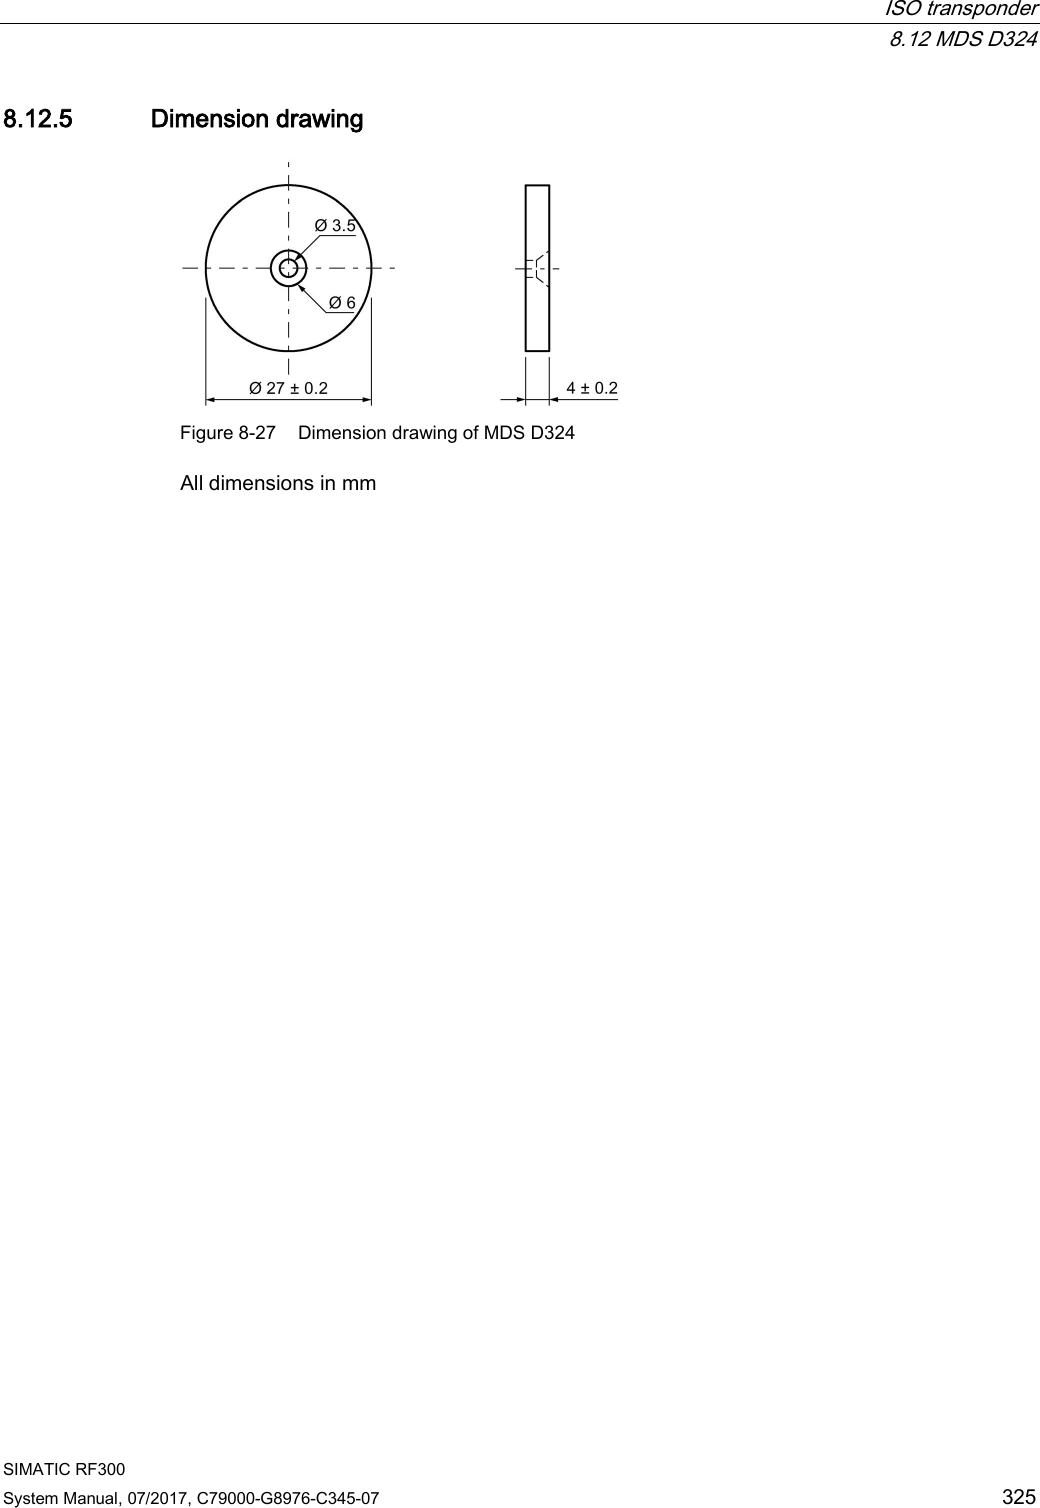  ISO transponder  8.12 MDS D324 SIMATIC RF300 System Manual, 07/2017, C79000-G8976-C345-07 325 8.12.5 Dimension drawing  Figure 8-27 Dimension drawing of MDS D324 All dimensions in mm 